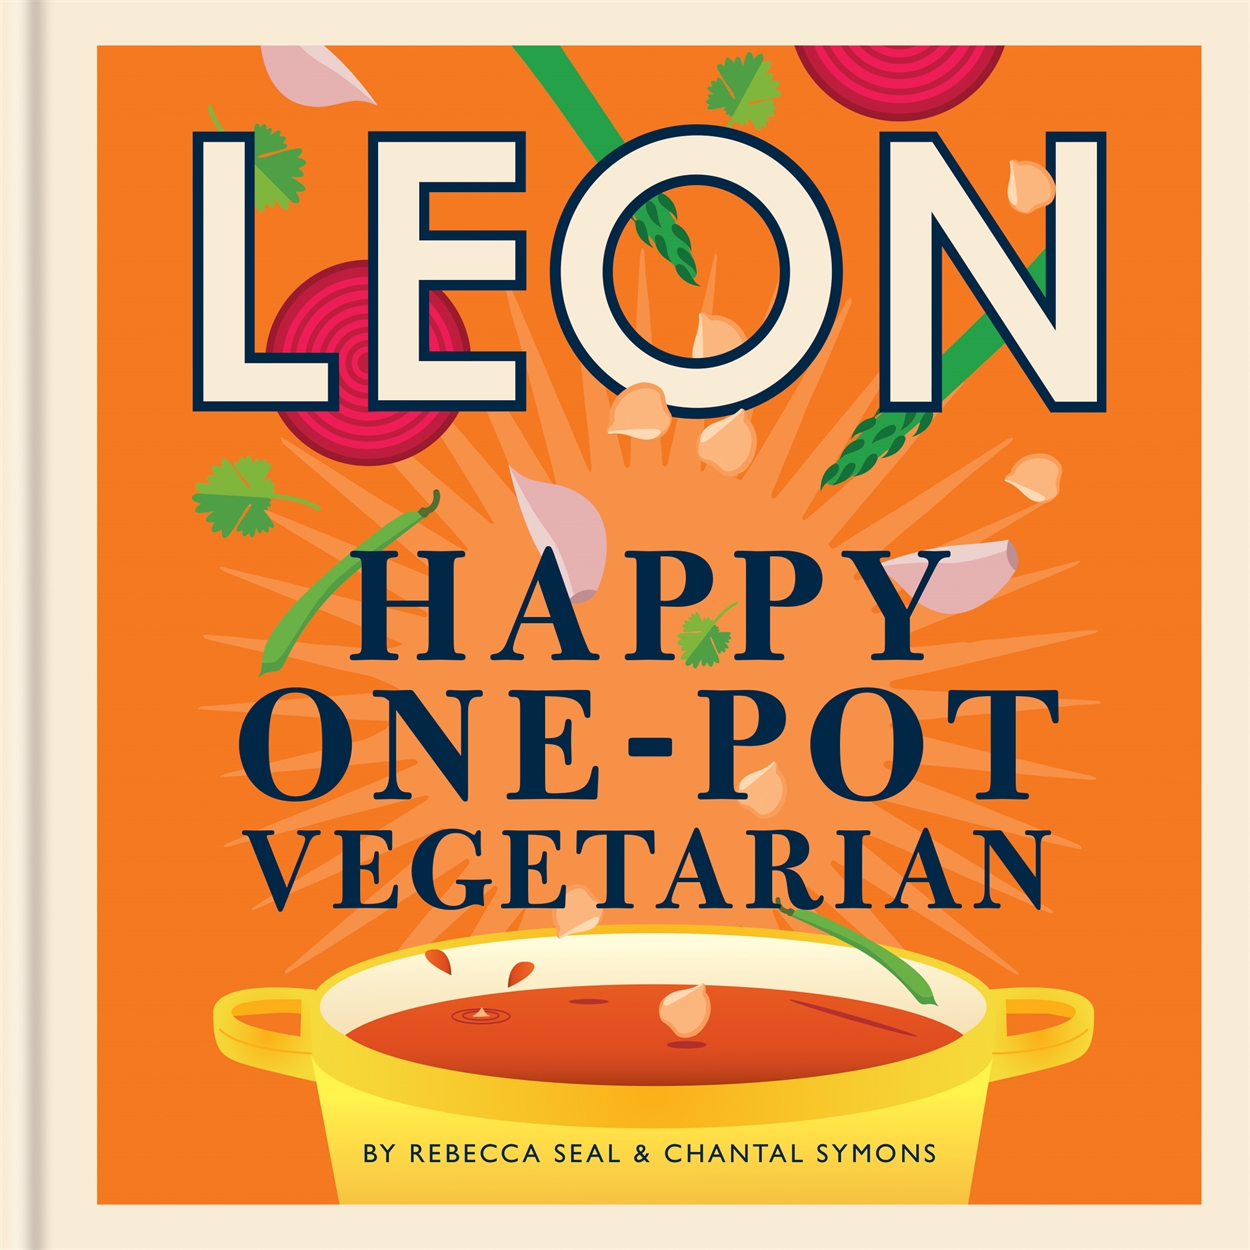 One-pot　of　Happy　Seal　non-fiction　Leons:　Rebecca　The　Leon　home　Happy　Vegetarian　by　publishing